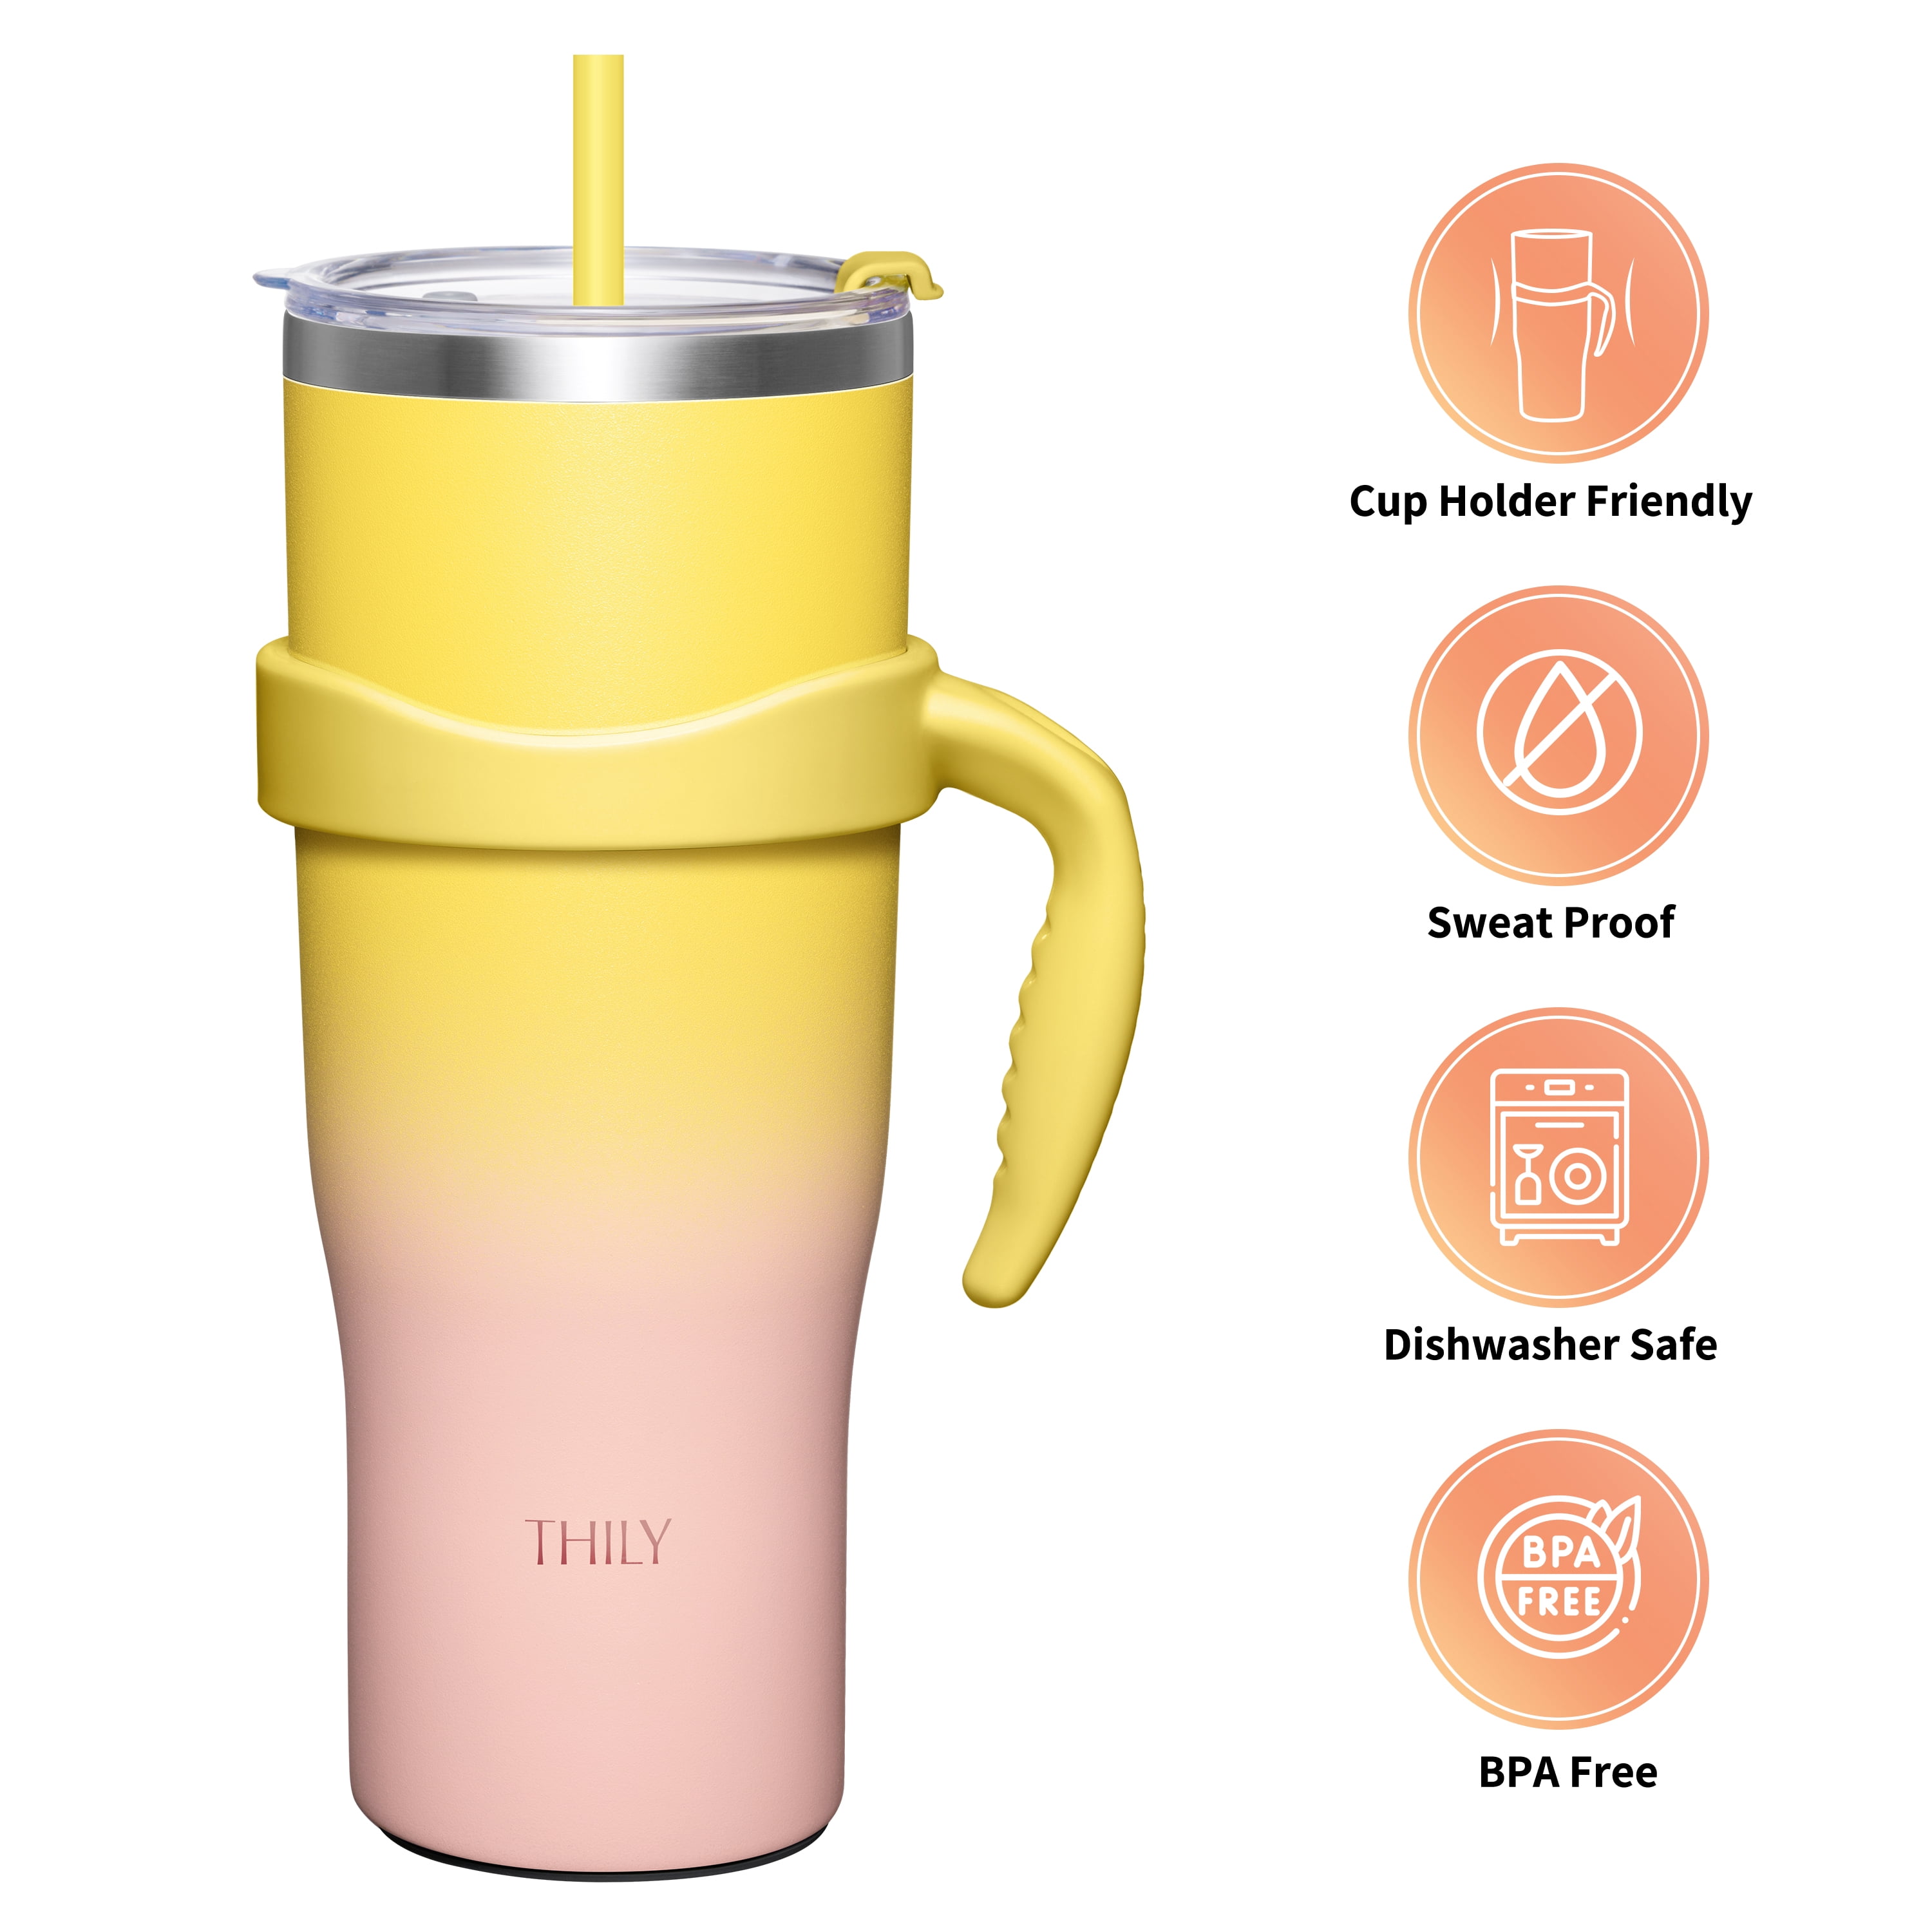 Brand: Thermoboss Type: Stainless Steel Thermos Cup Specs: 40oz, Vacuum  Insulated Keywords: Coffee Tumbler, Portable, Double Layer, Car Mug, Travel  Water Key Points: Durable, Leak Proof, Easy To Clean Main Features: Handle